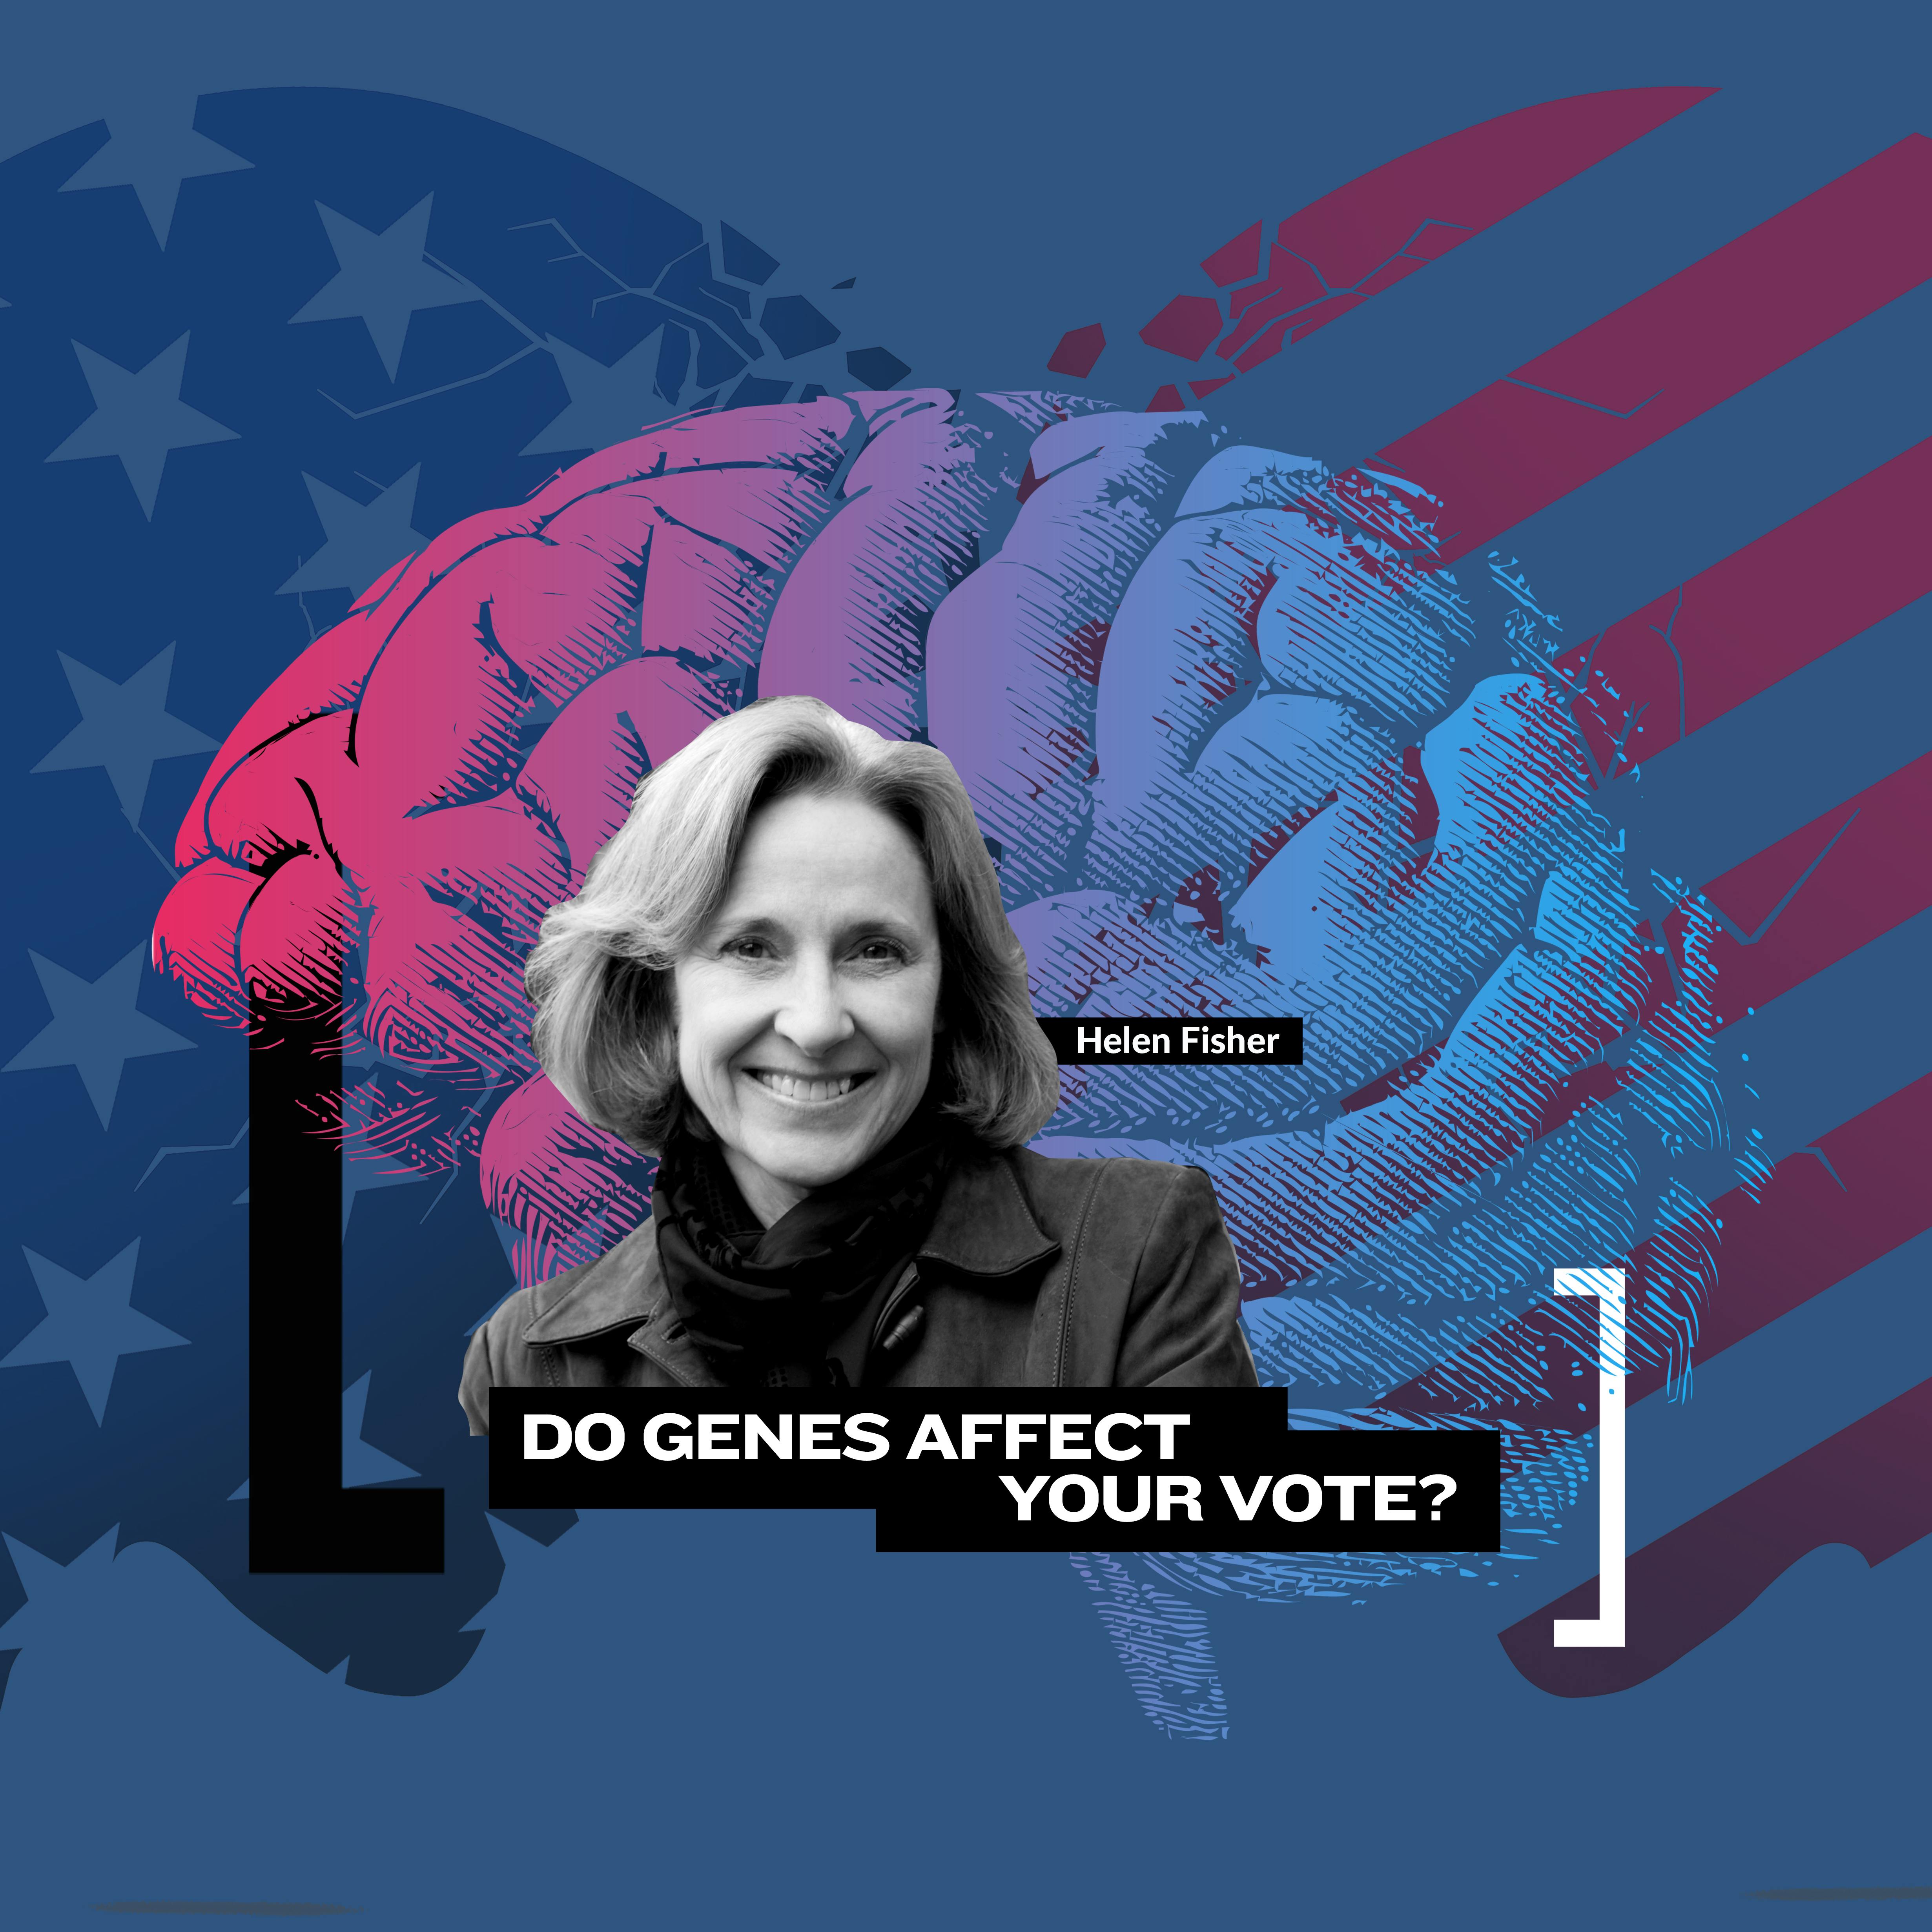 Helen Fisher on How Genes Affect Your Politics